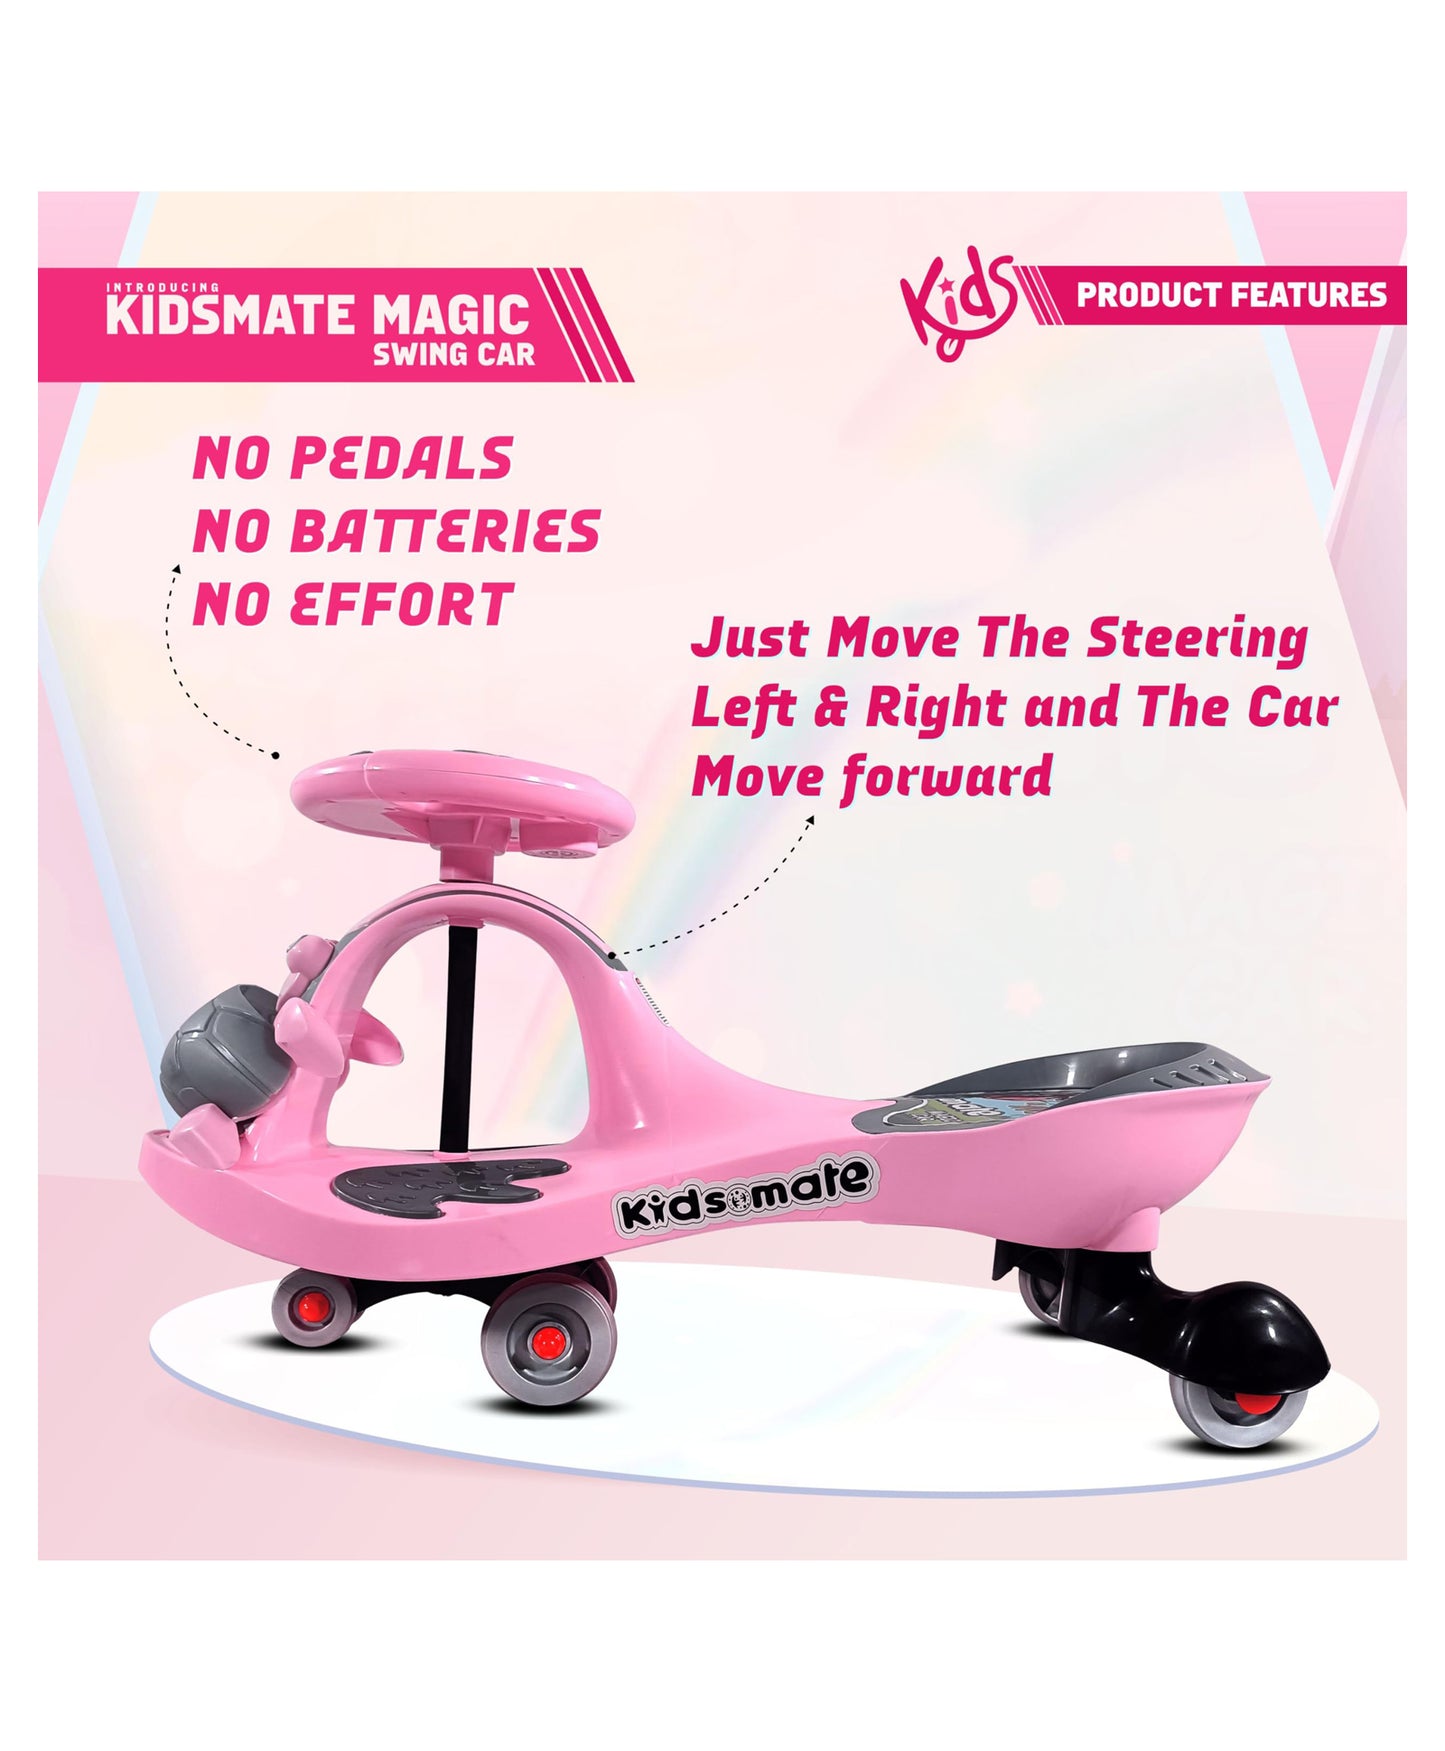 Kidsmate Magic Swing Car for Kids with Music & LED Lights, Ride-On Baby Car, Kids Push Car, Swing Car | Elegant Design with Extra Wide Seat for Kids (Pink)